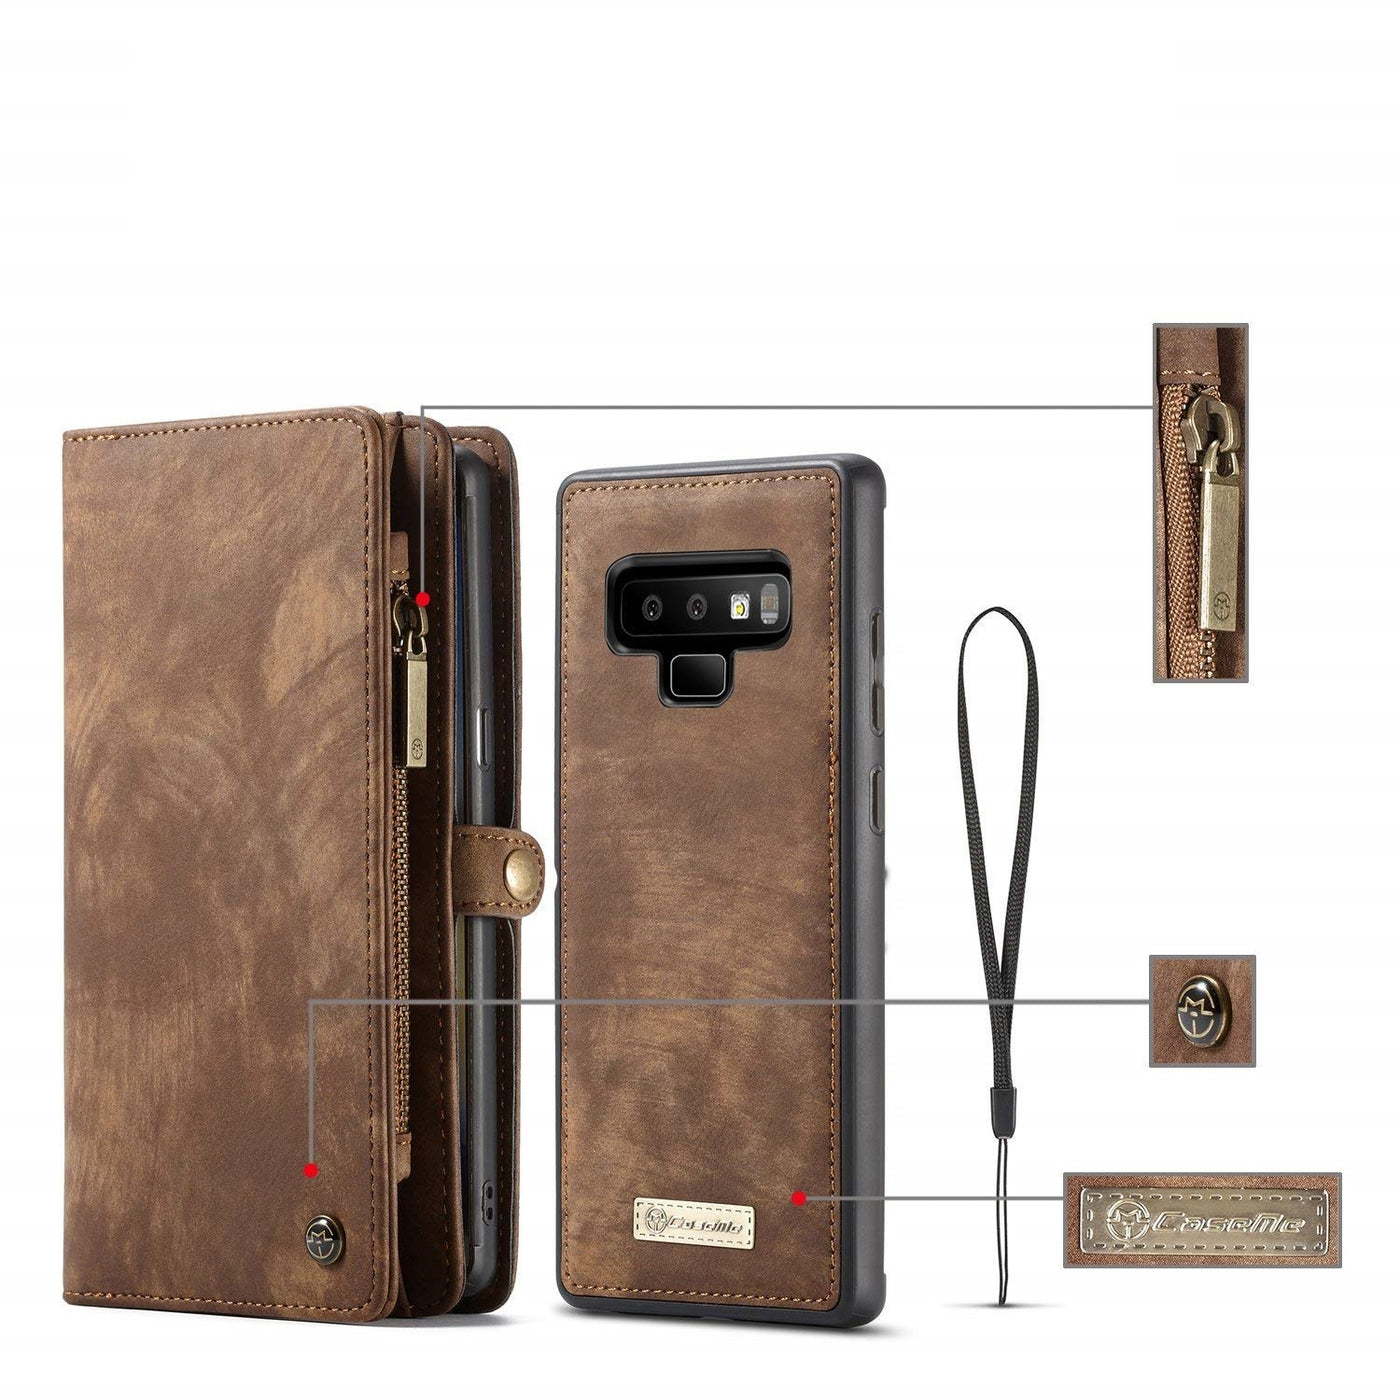 Samsung Galaxy Note 9 high quality unique designer leather case cover